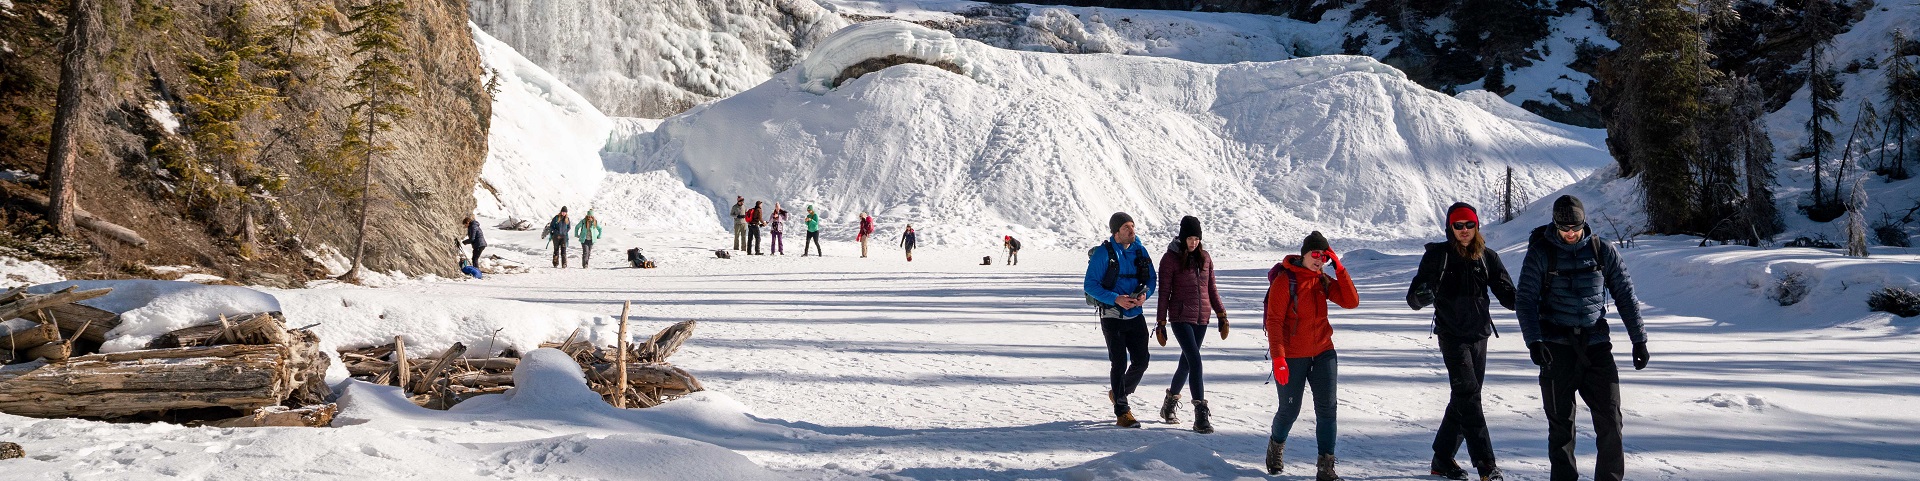 Group of five walkers in front of icy and snowy Wapta Falls, and several individuals in the background at the foot of the falls.